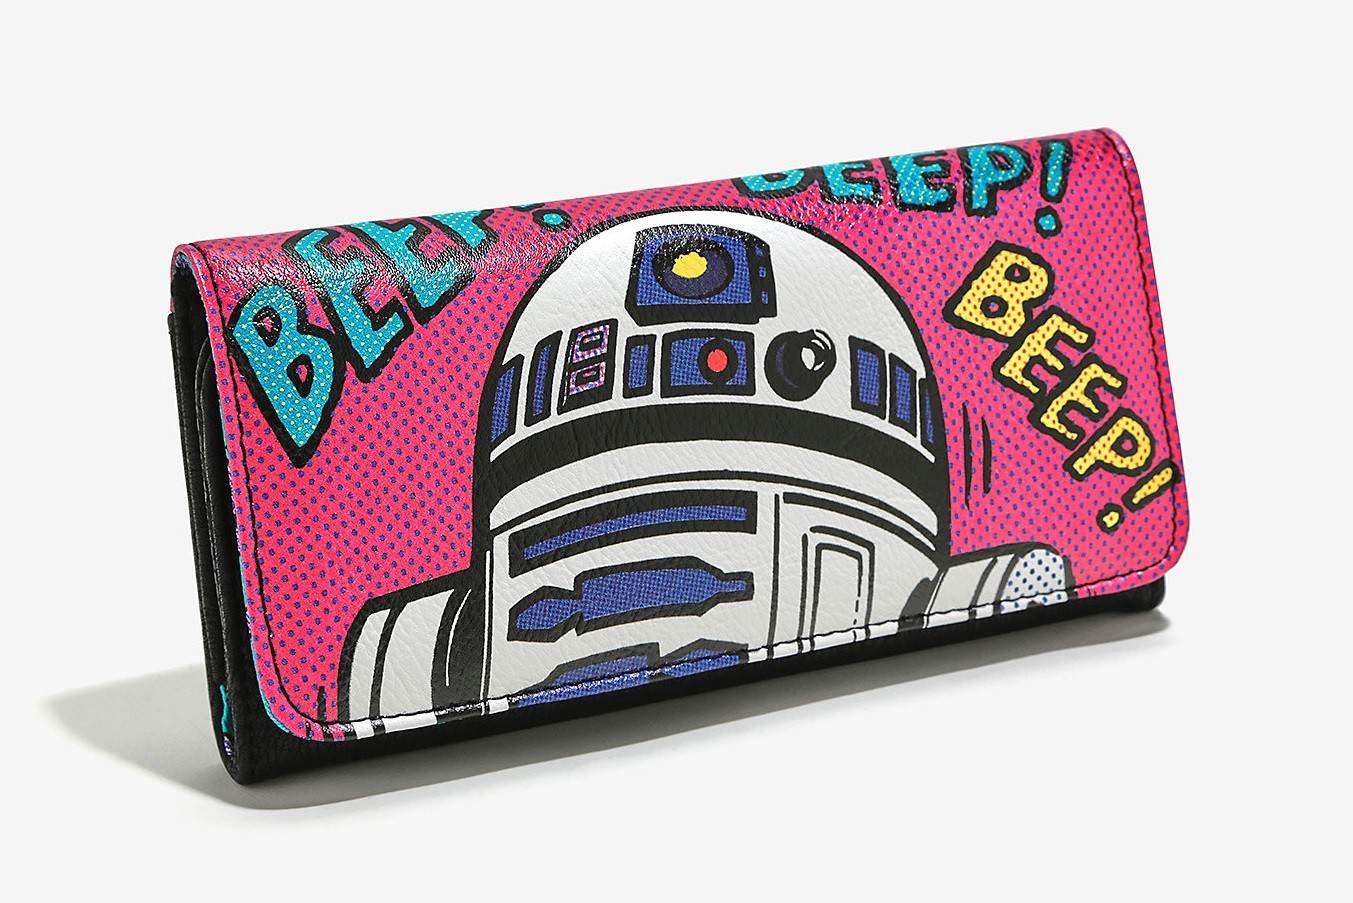 Box Lunch - Loungefly x Star Wars R2-D2 comic wallet